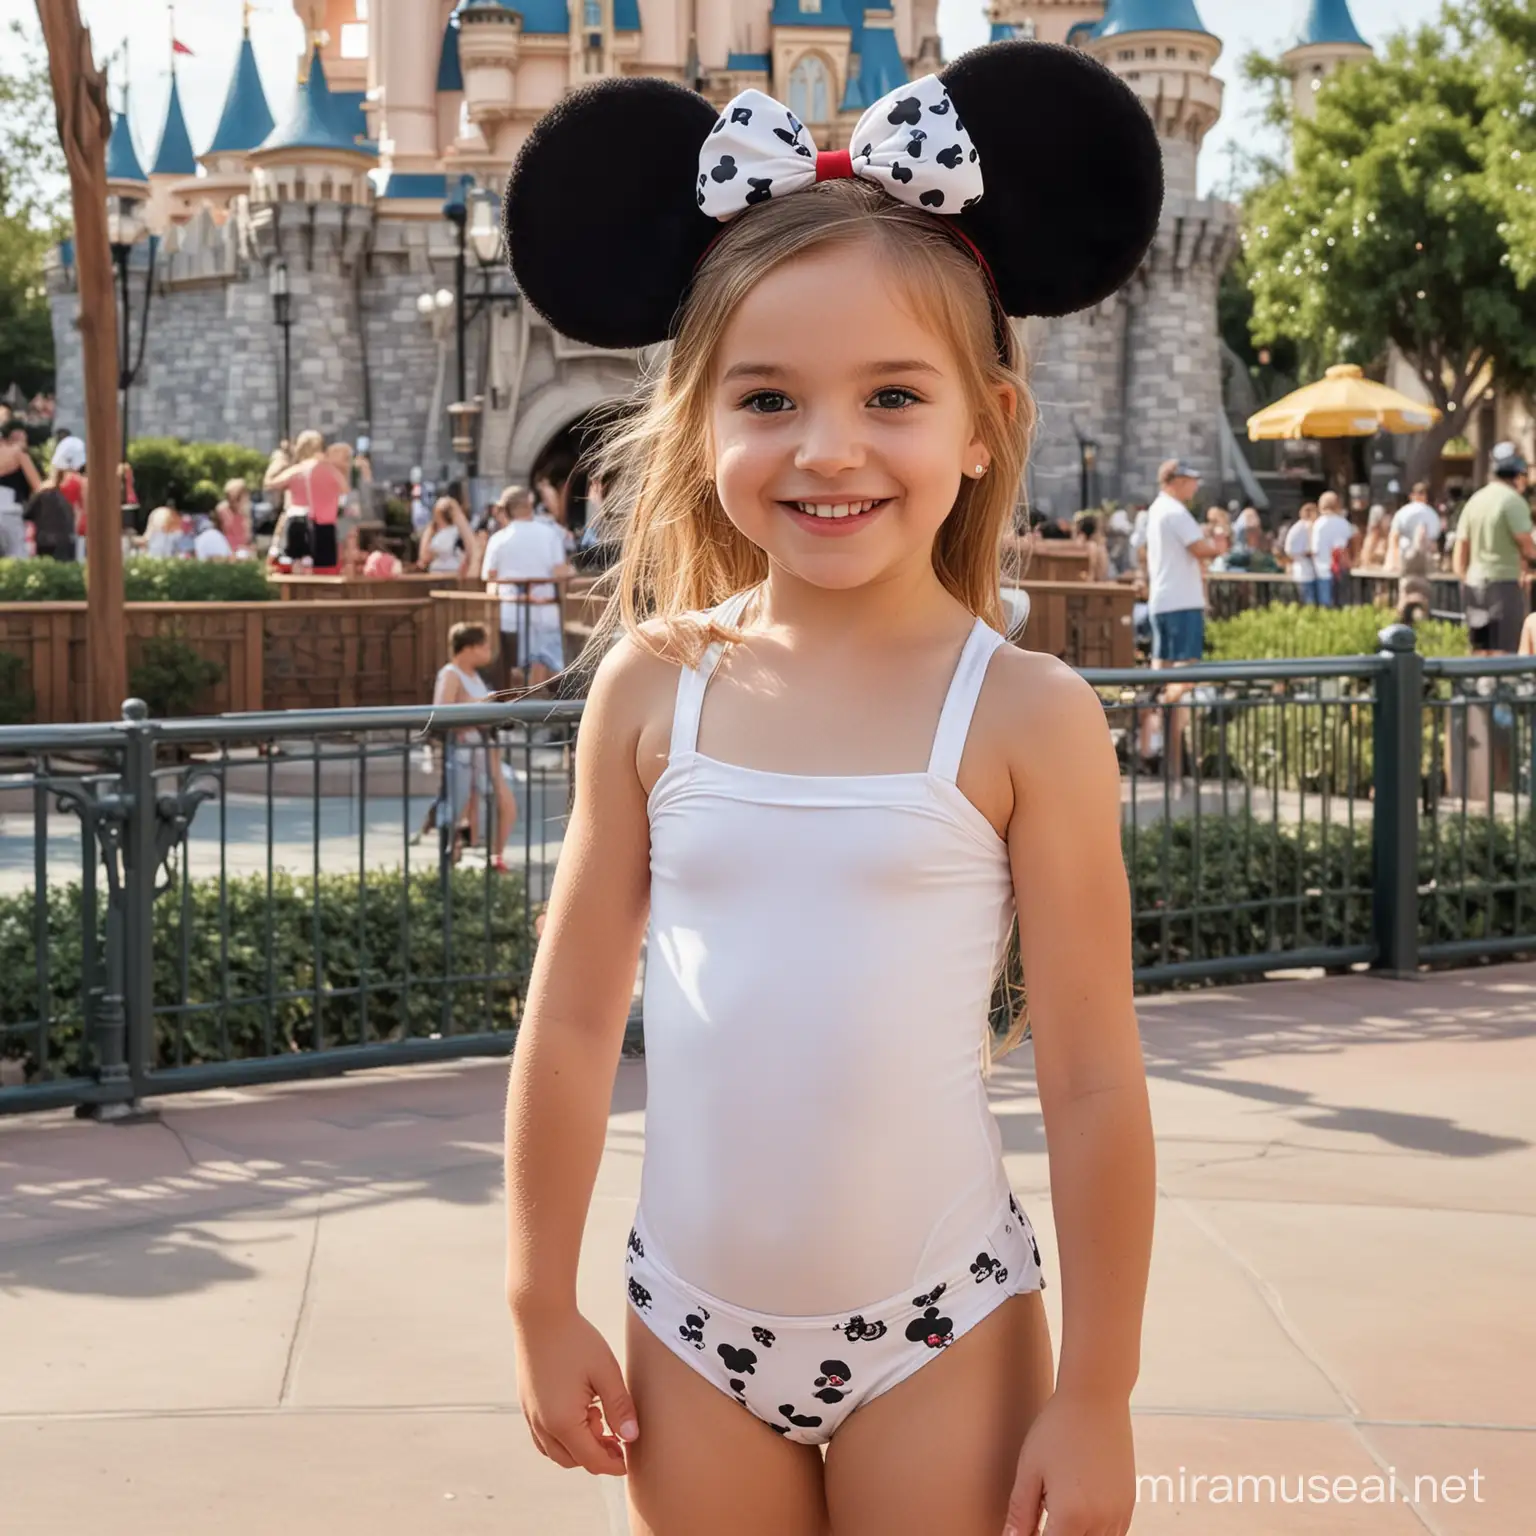 A 7-year-old girl in white tight bikini, braces, cameltoe, wearing mickey mouse ears, at Disneyland, realistic.